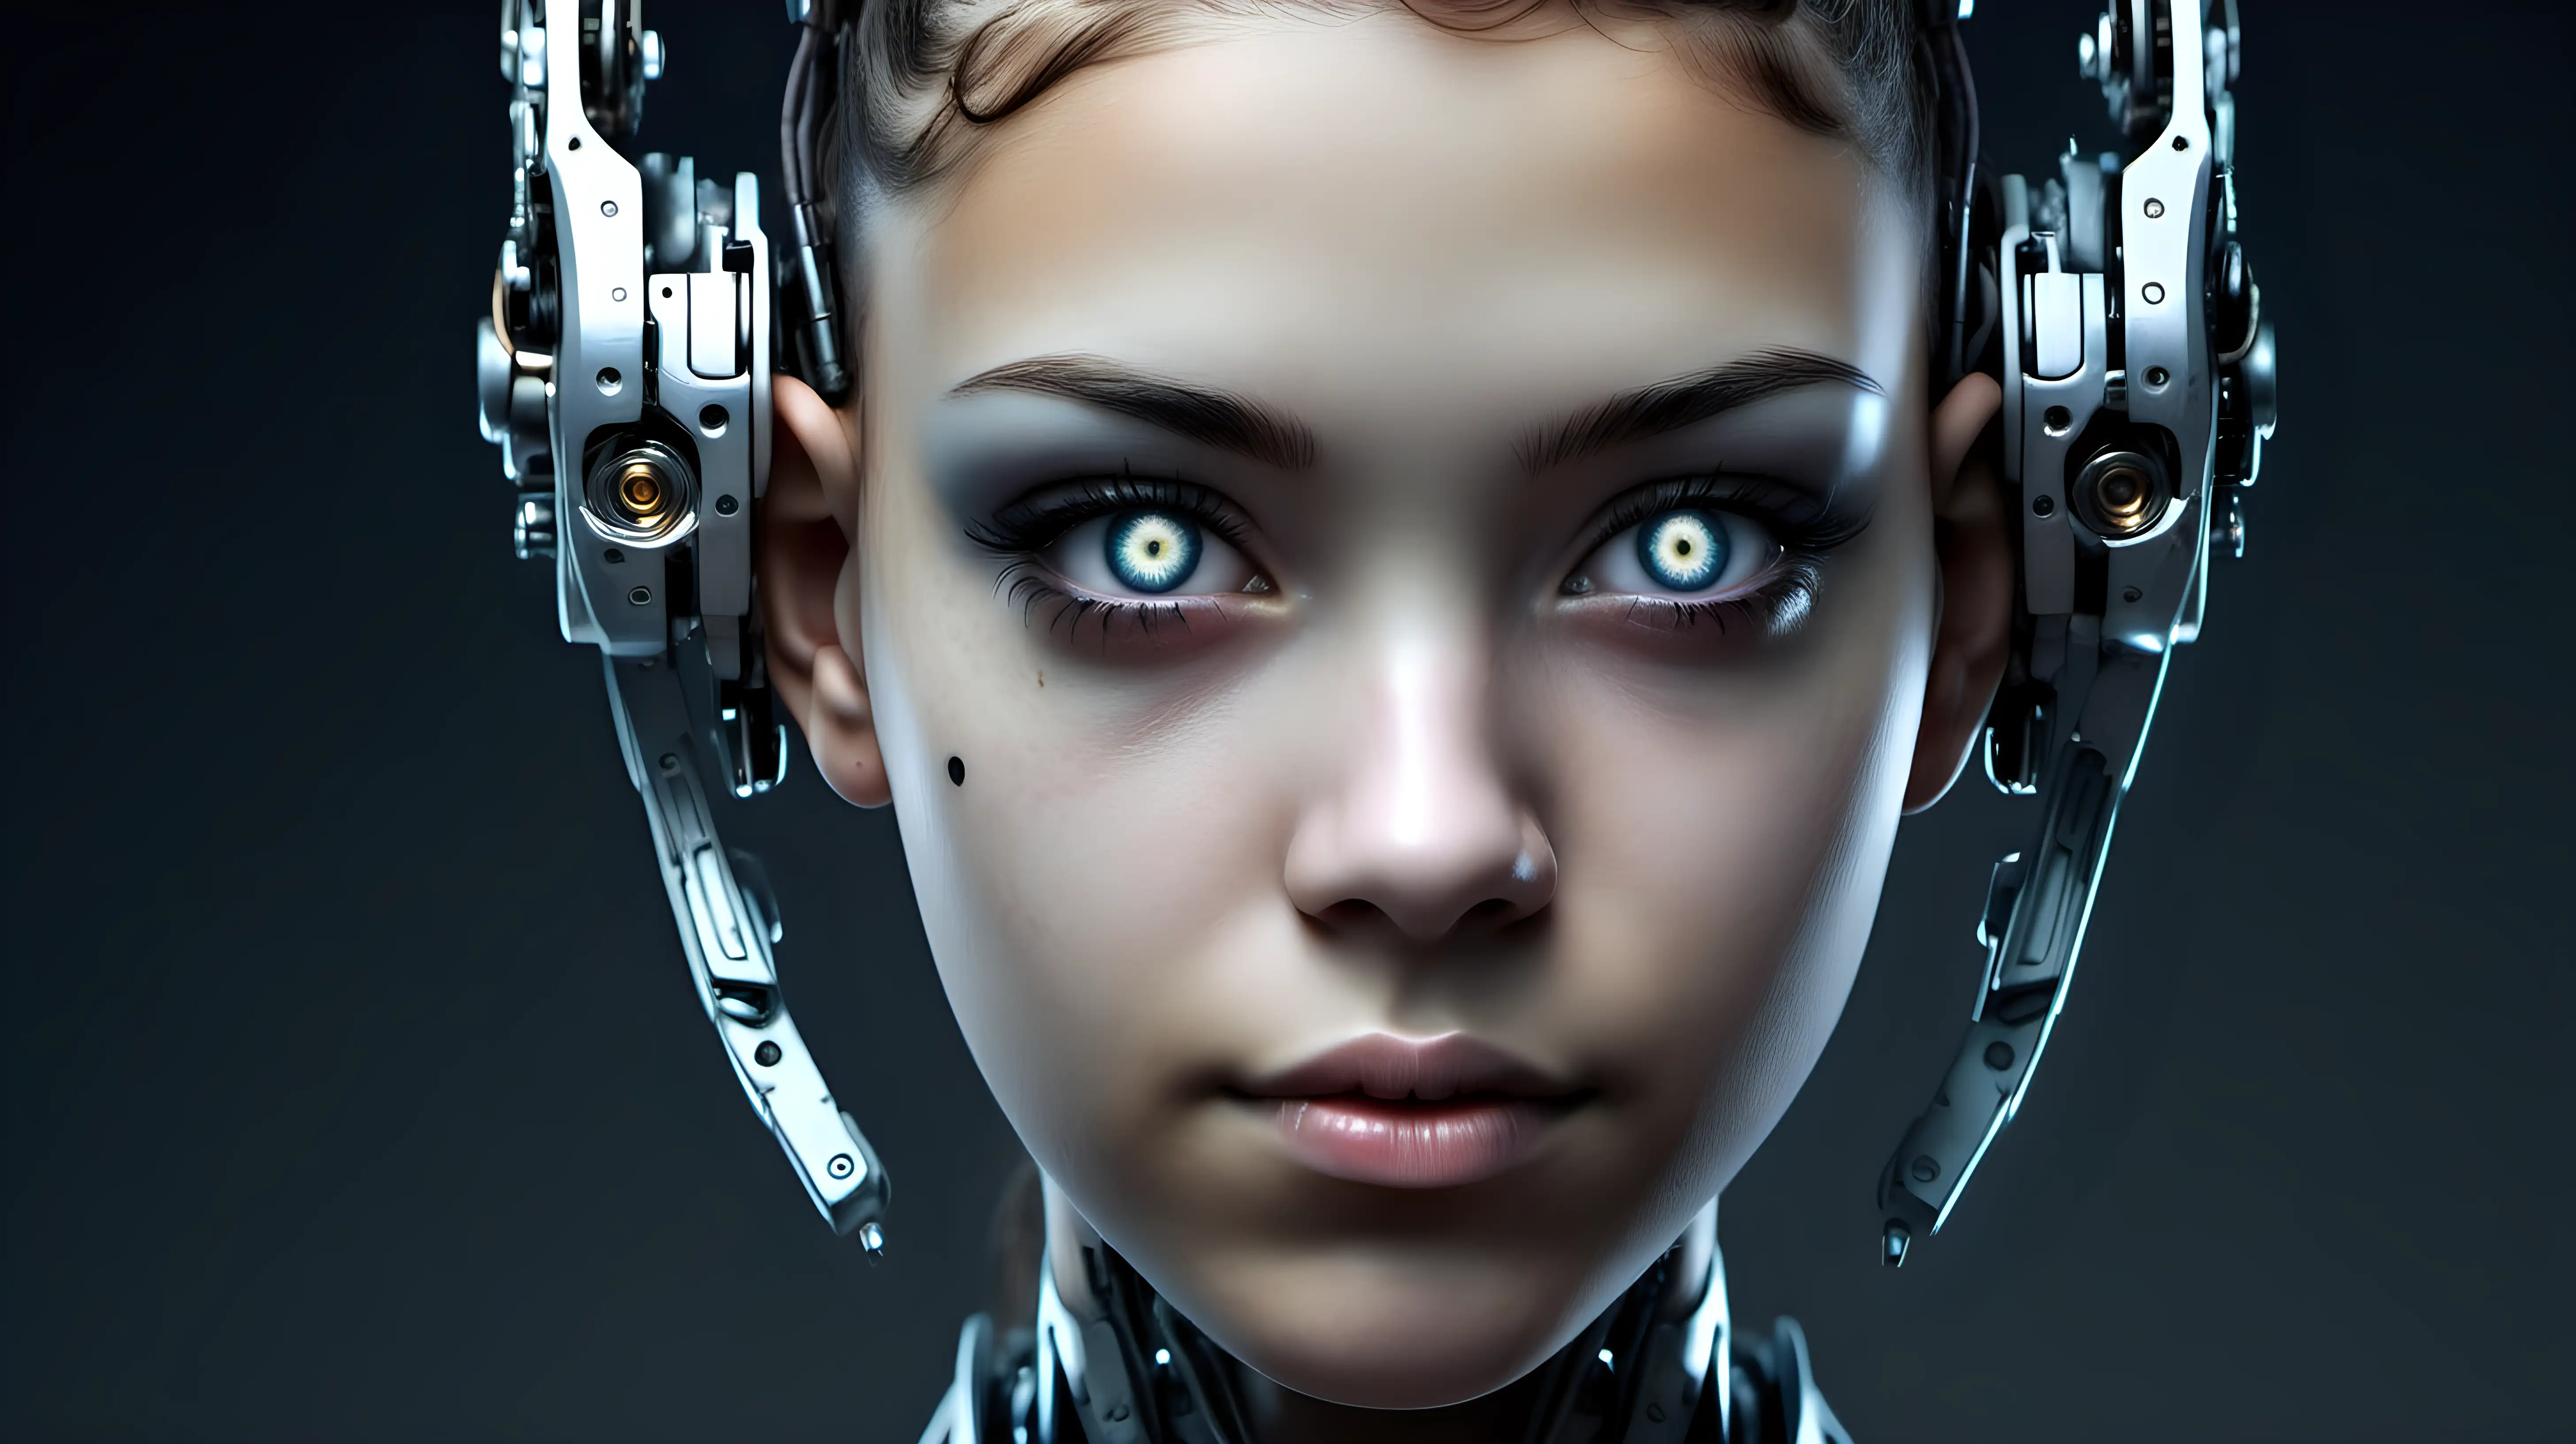 Beautiful Cyborg Woman with Natural Eyes